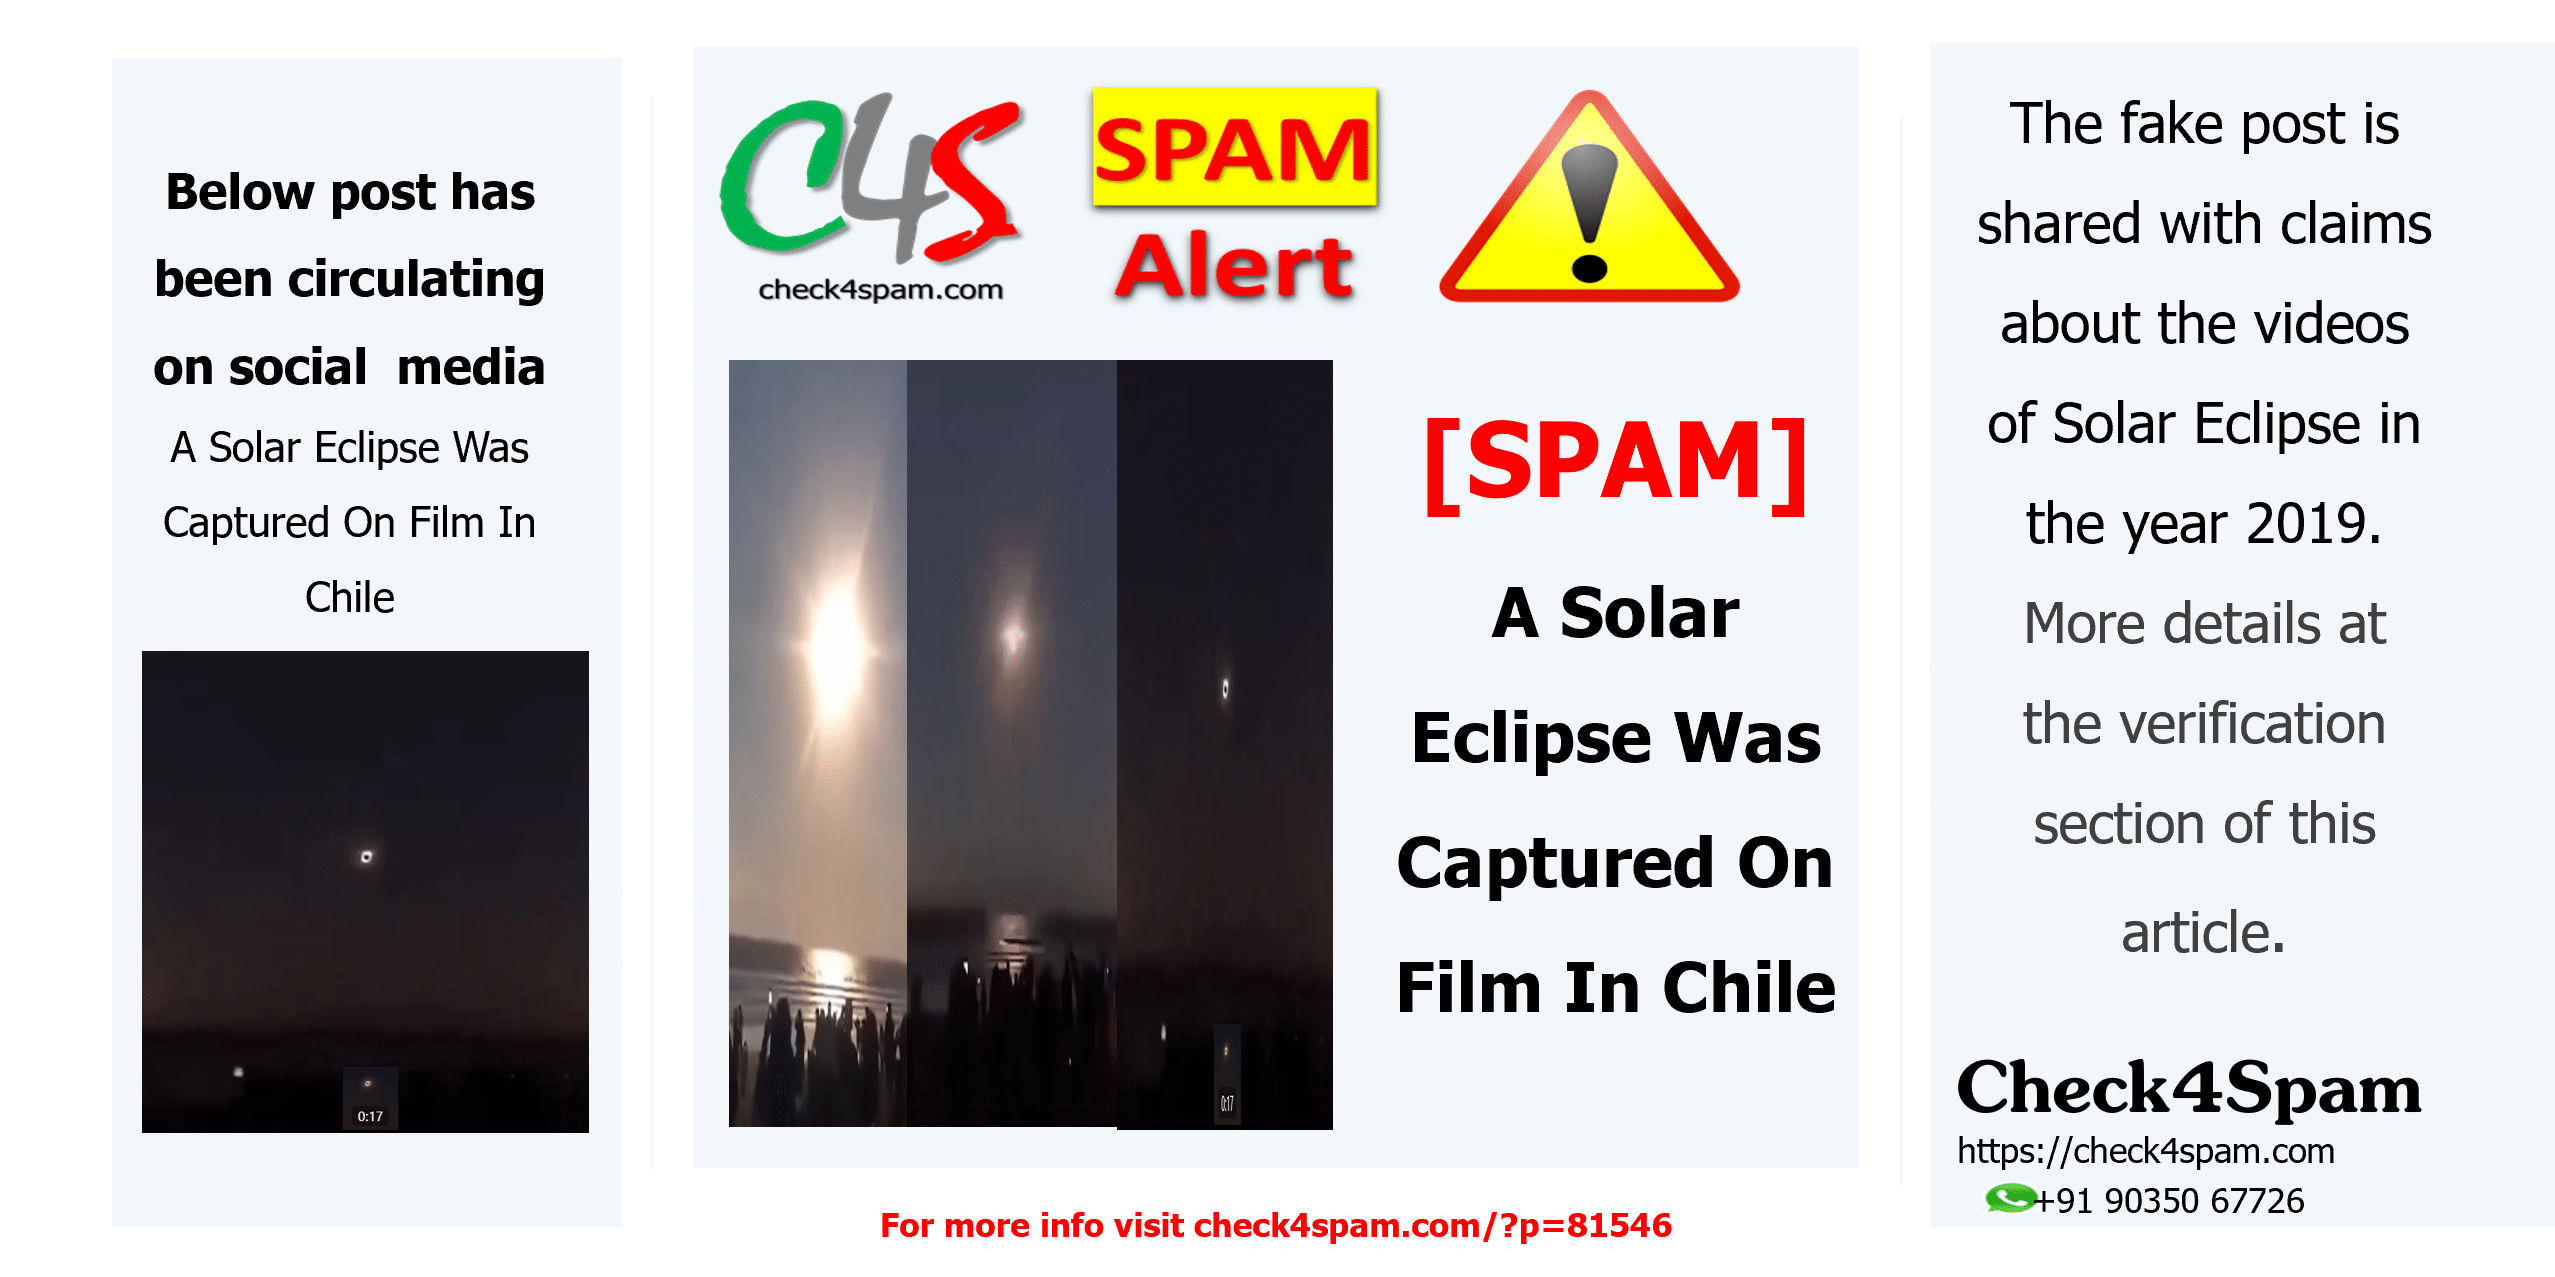 A Solar Eclipse Was Captured On Film In Chile